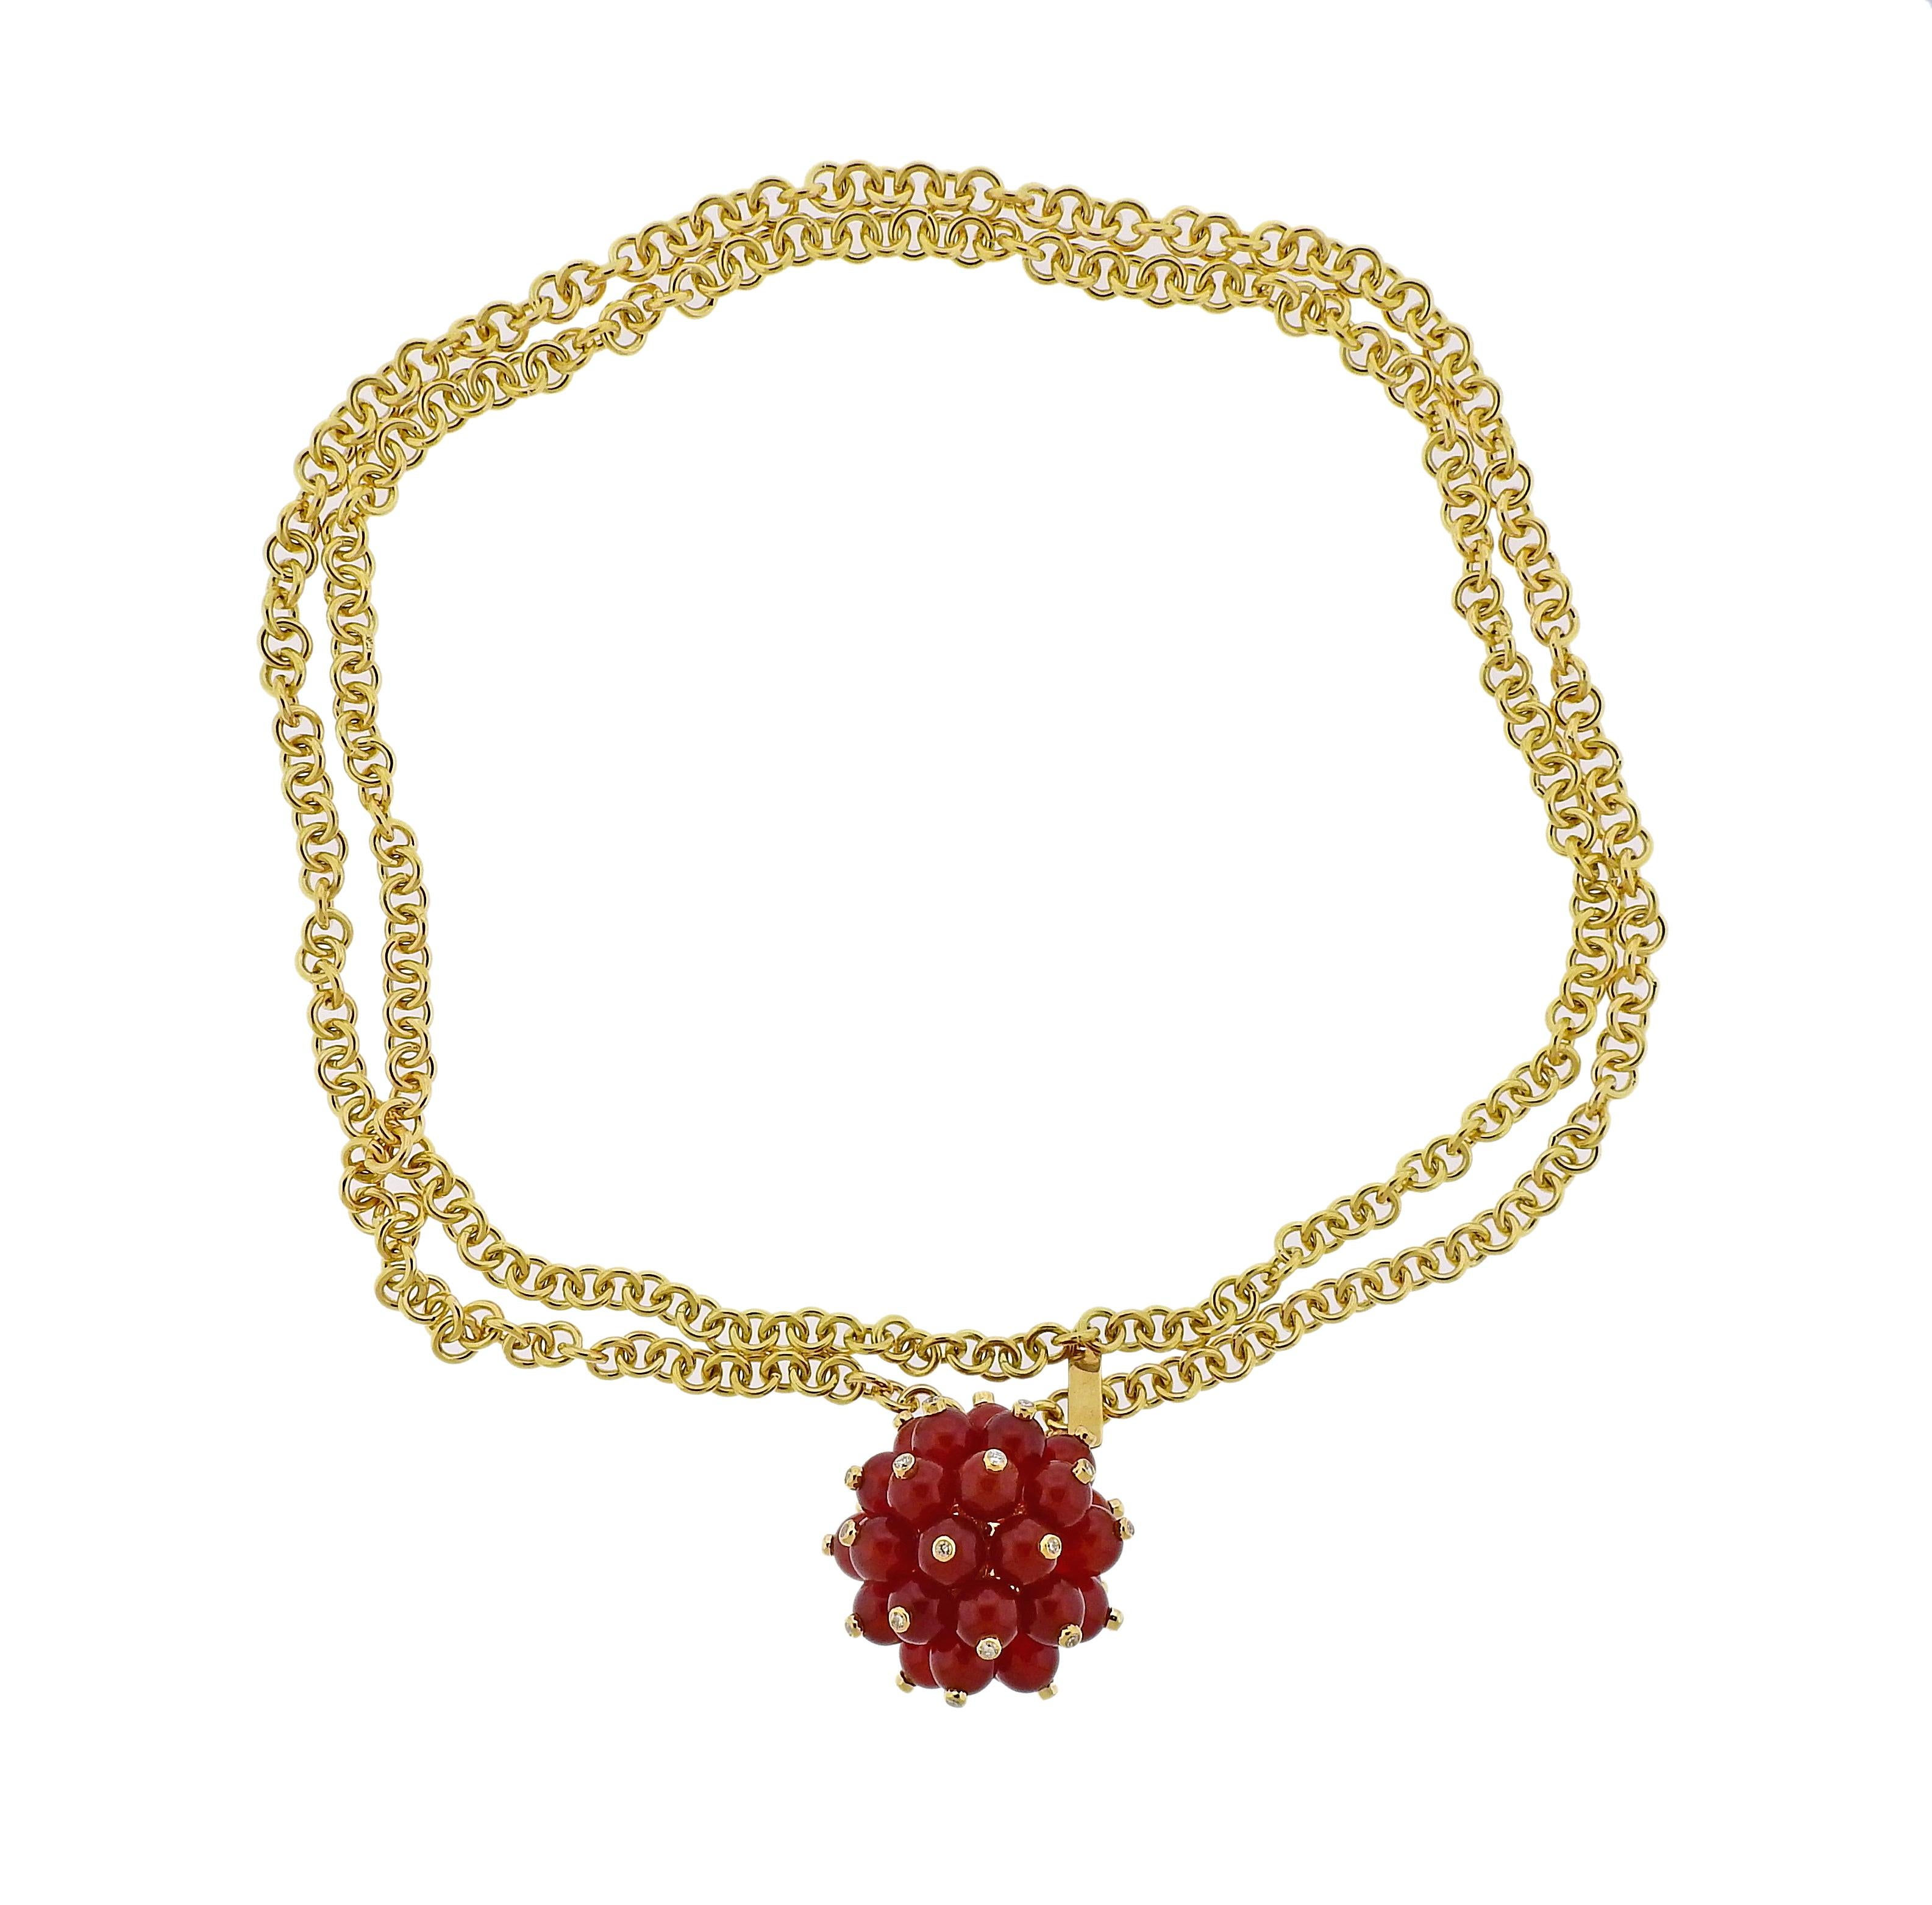 New 18k yellow gold long chain necklace, featuring carnelian and diamond pom pom pendant. Crafted by Aletto Brothers, set with 0.72ctw in VVS-VS/G diamonds.  Necklace is 32